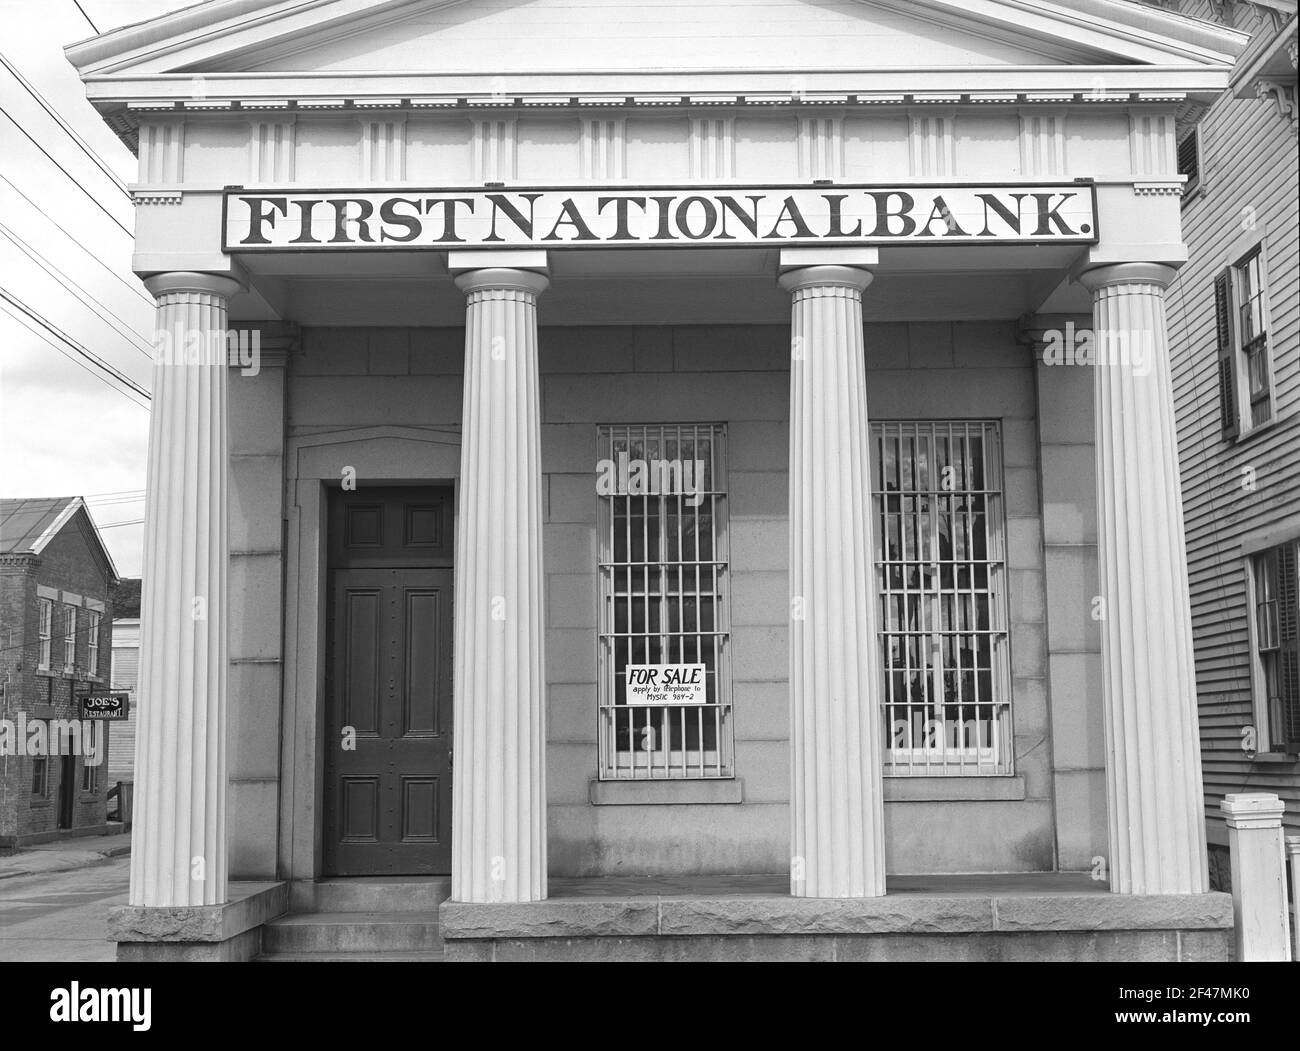 First National Bank with 'For Sale' Sign, Stonington, Connecticut, USA, Jack Delano, U.S. Farm Security Administration, November 1940 Stock Photo